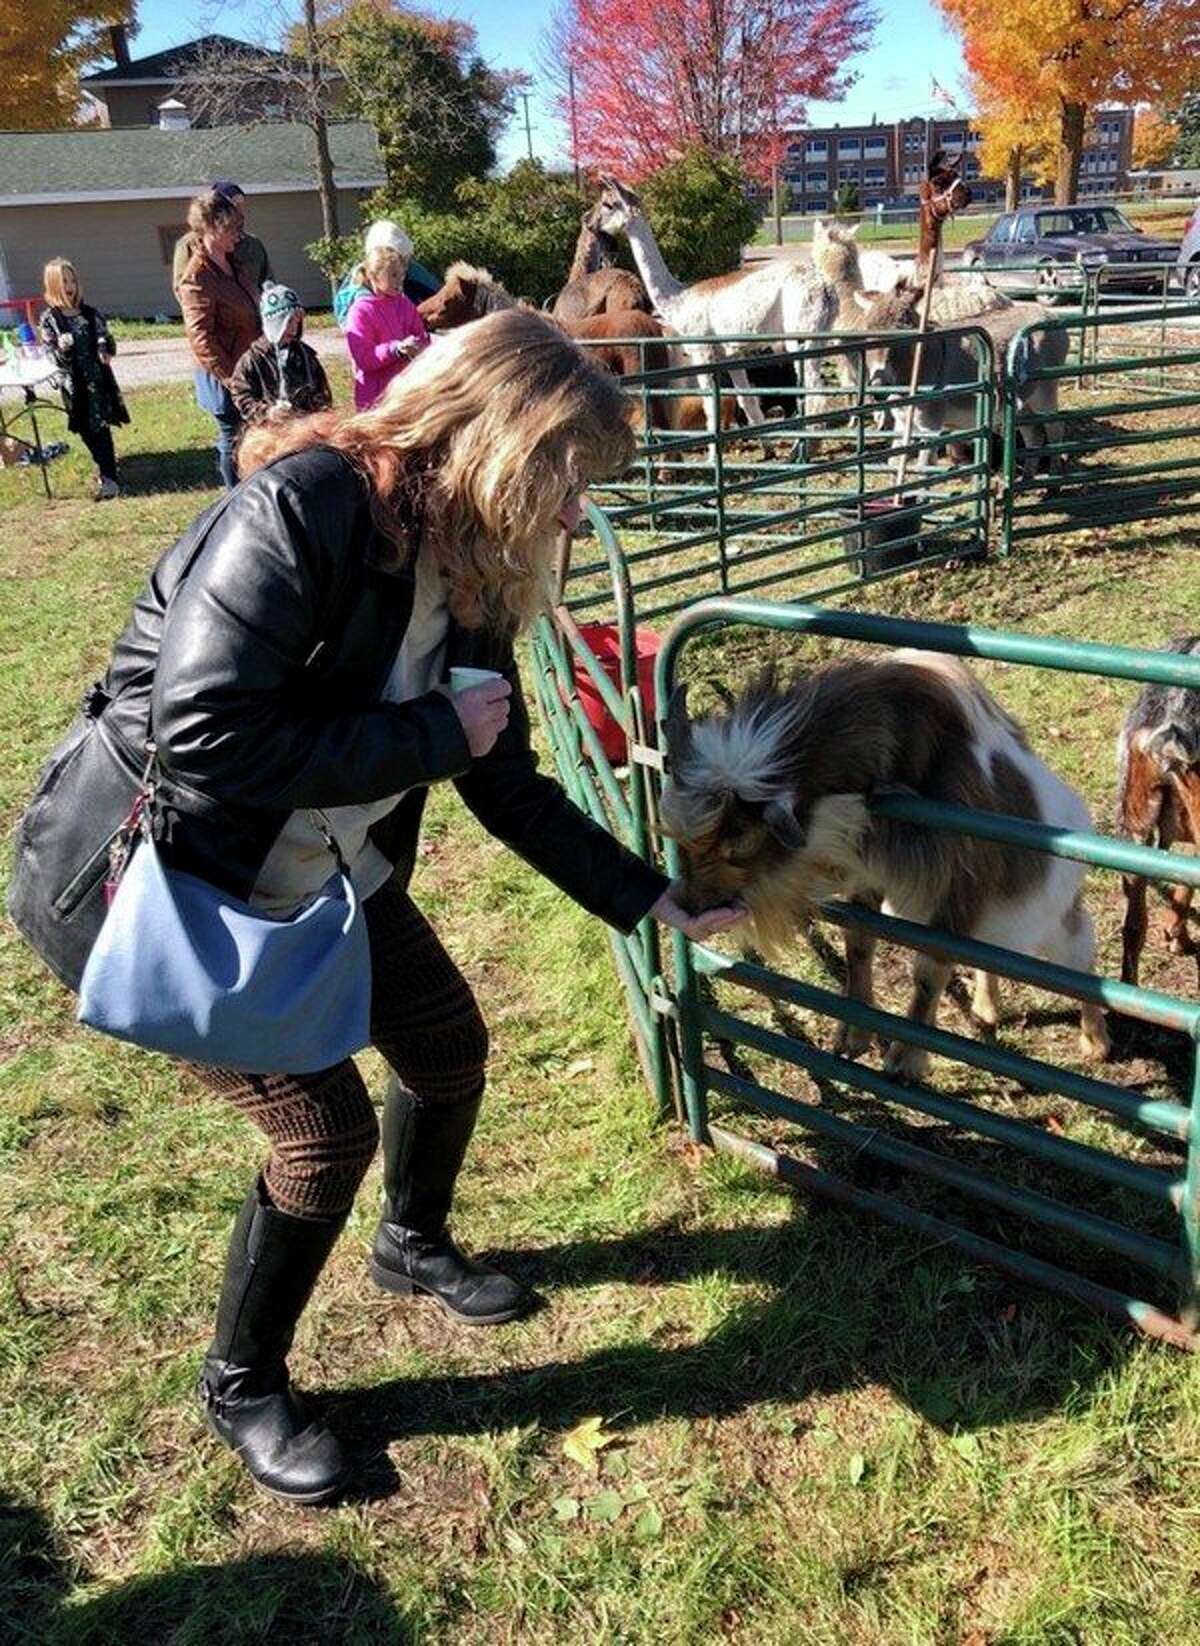 As well as a petting zoo, guests will have the opportunity to feed the animals, at no cost. This event is part of MOSAC's Free Sober Family Social Events. (Courtesy photo)